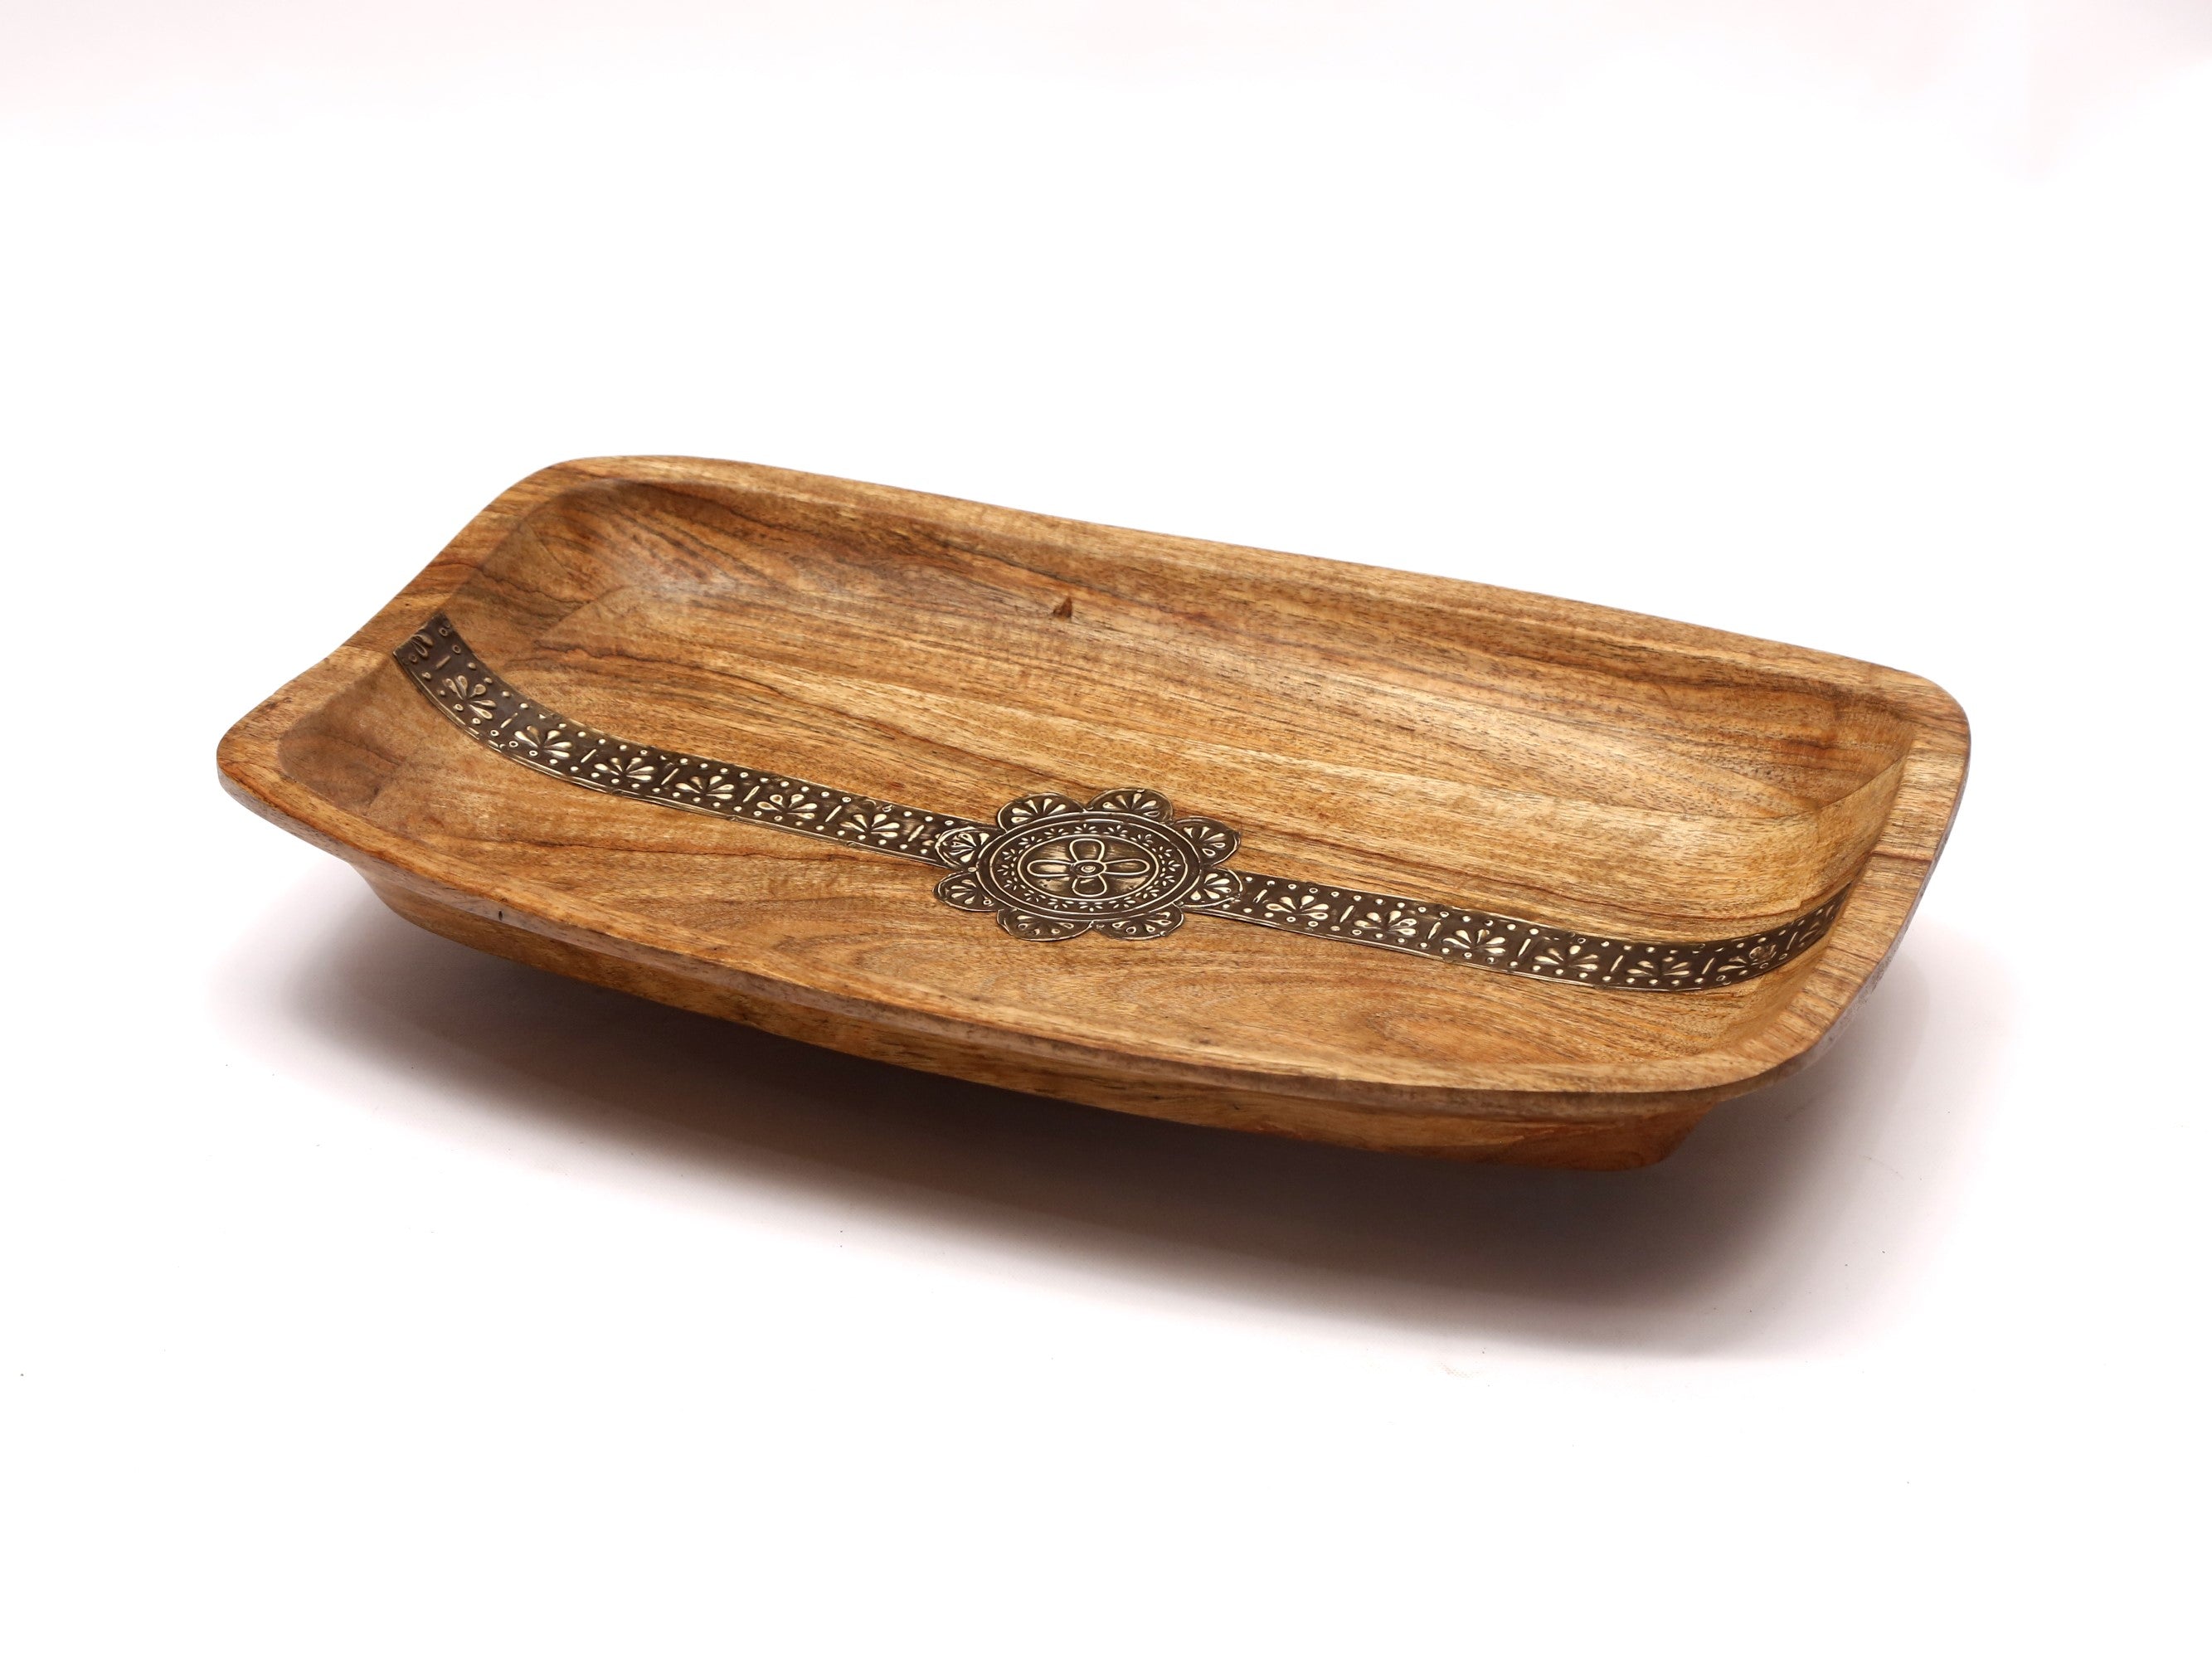 Metallic fitted wooden Tray Platter